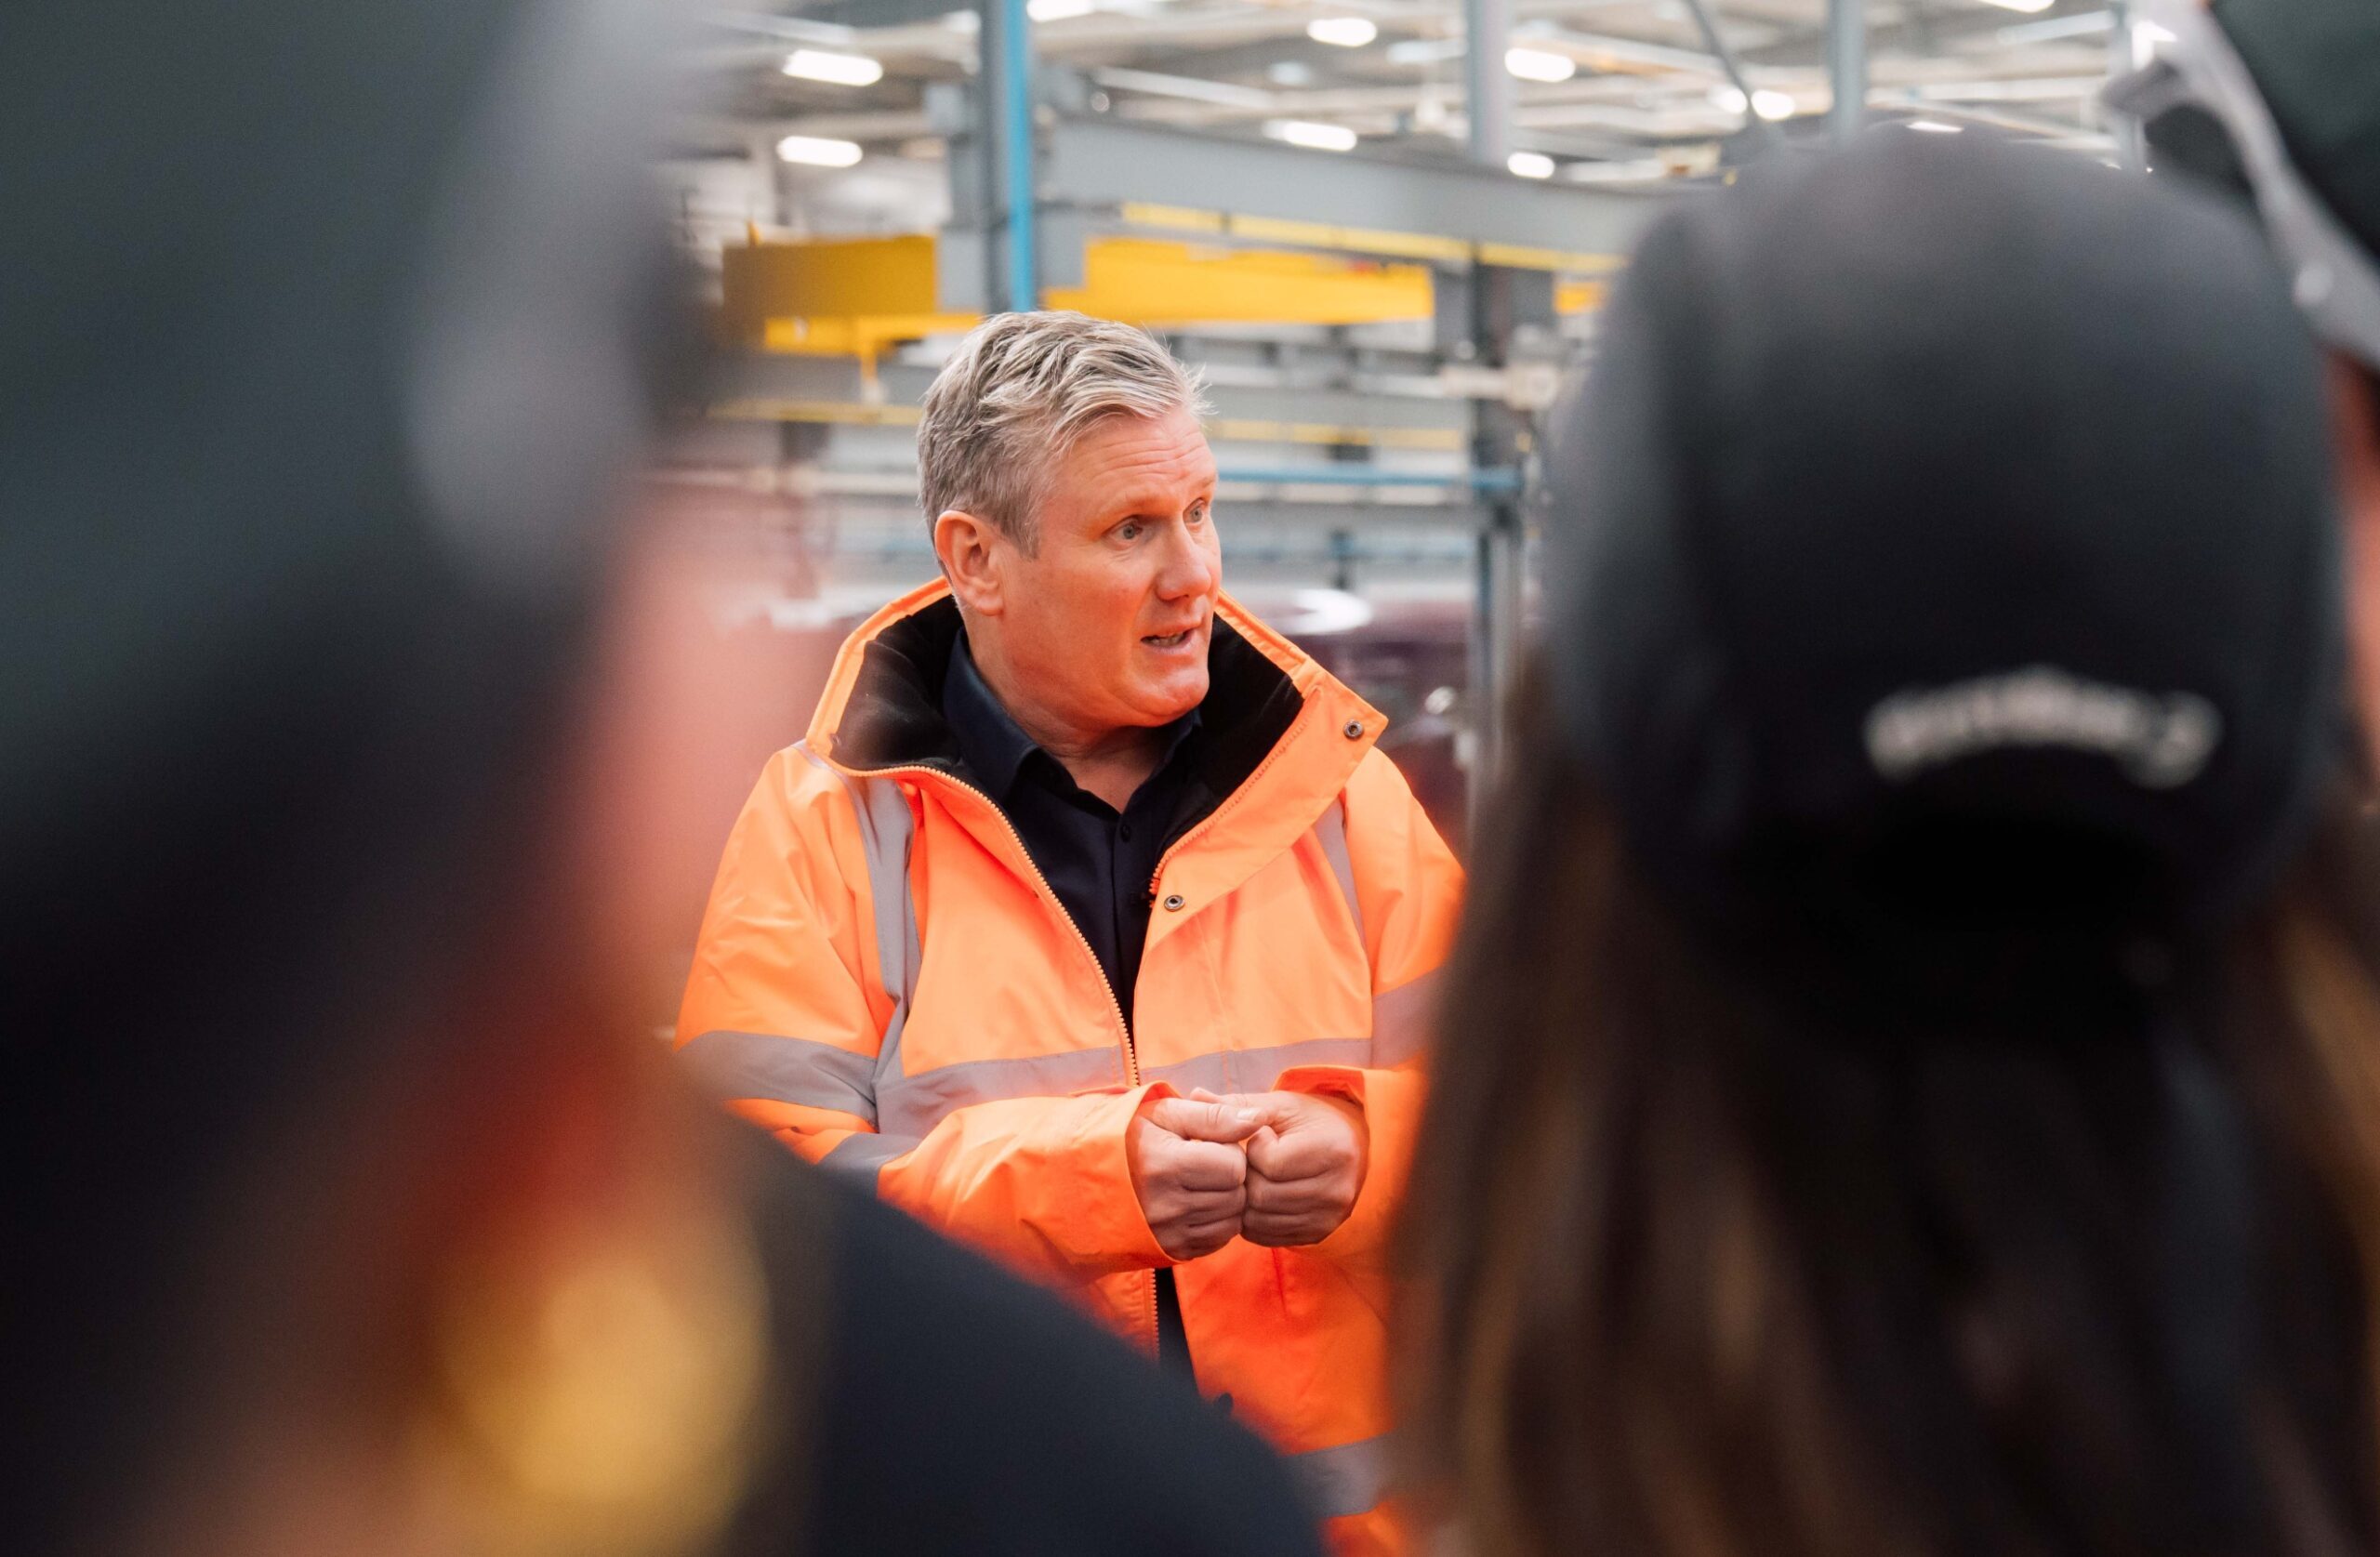 Keir Starmer speaking on a factory visit, wearing a high visibility orange coat.